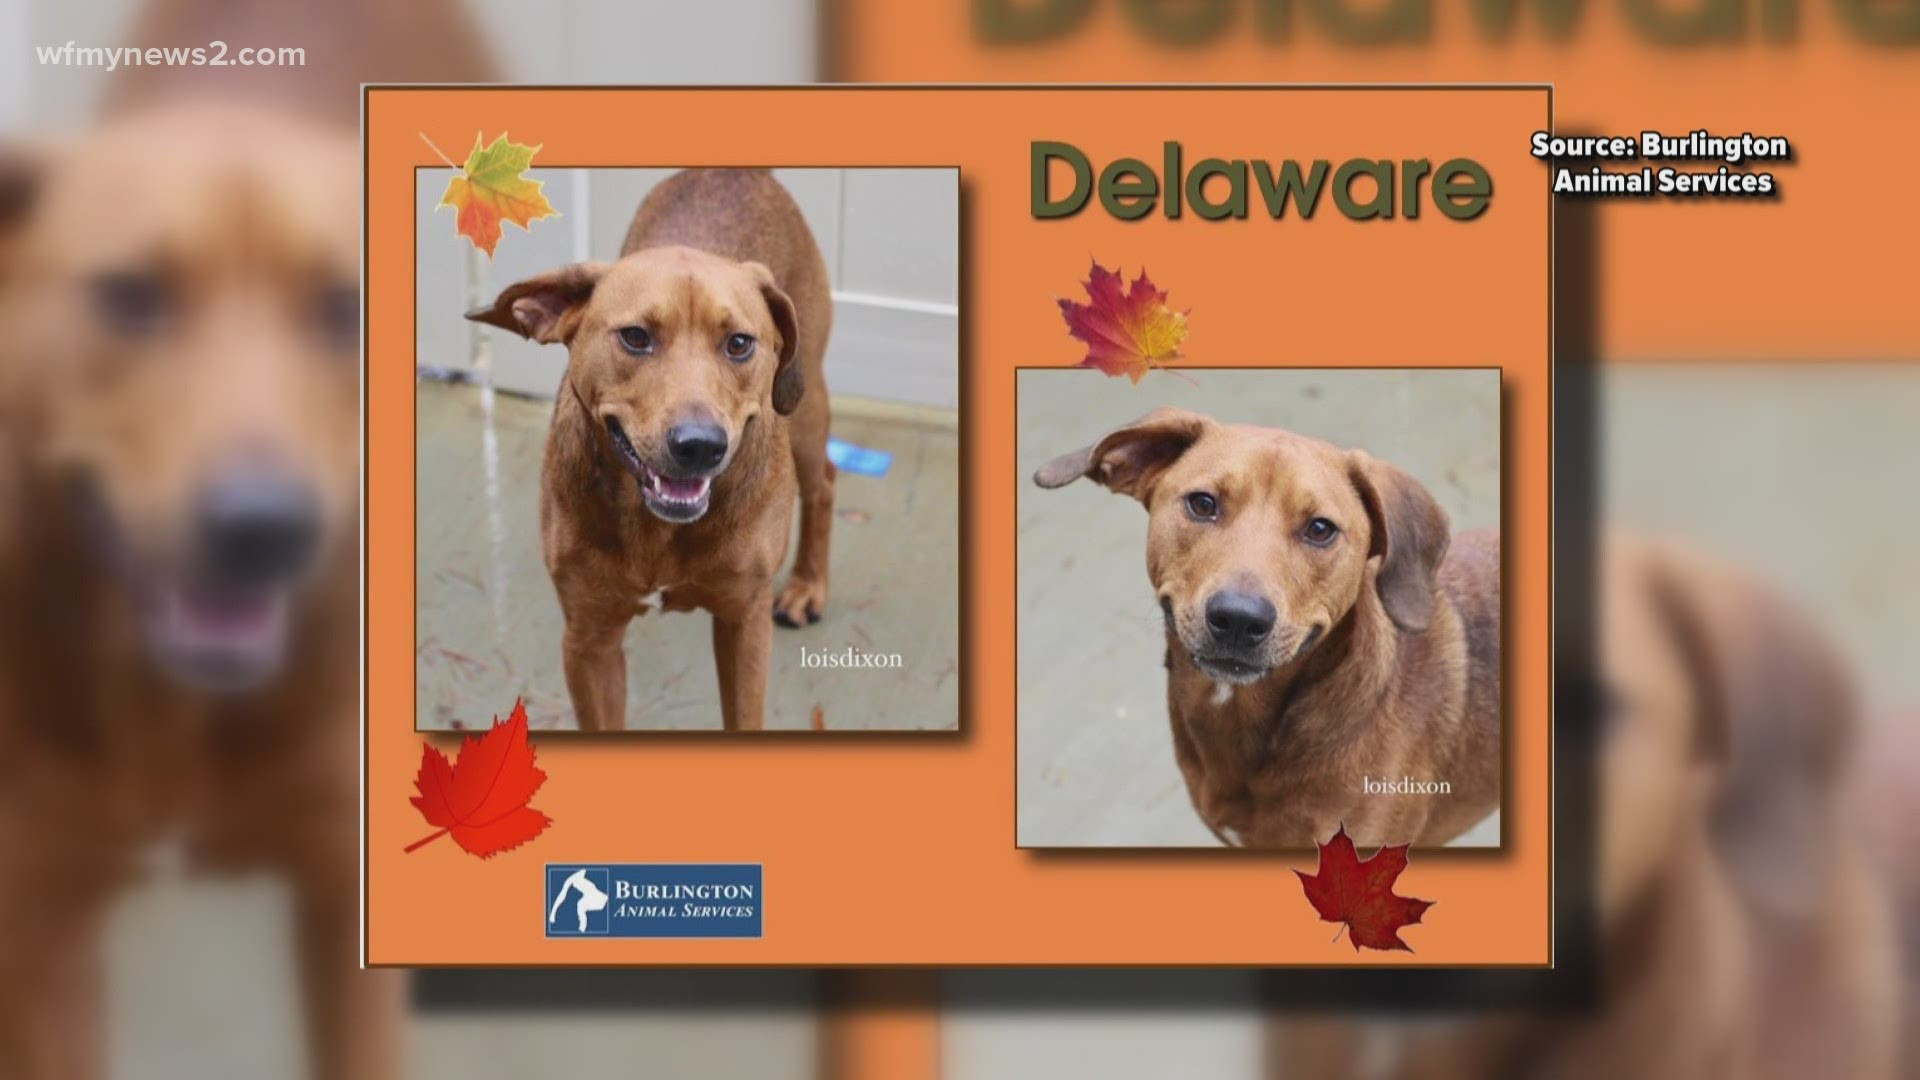 Delaware wants to be the newest family member at your Thanksgiving dinner.